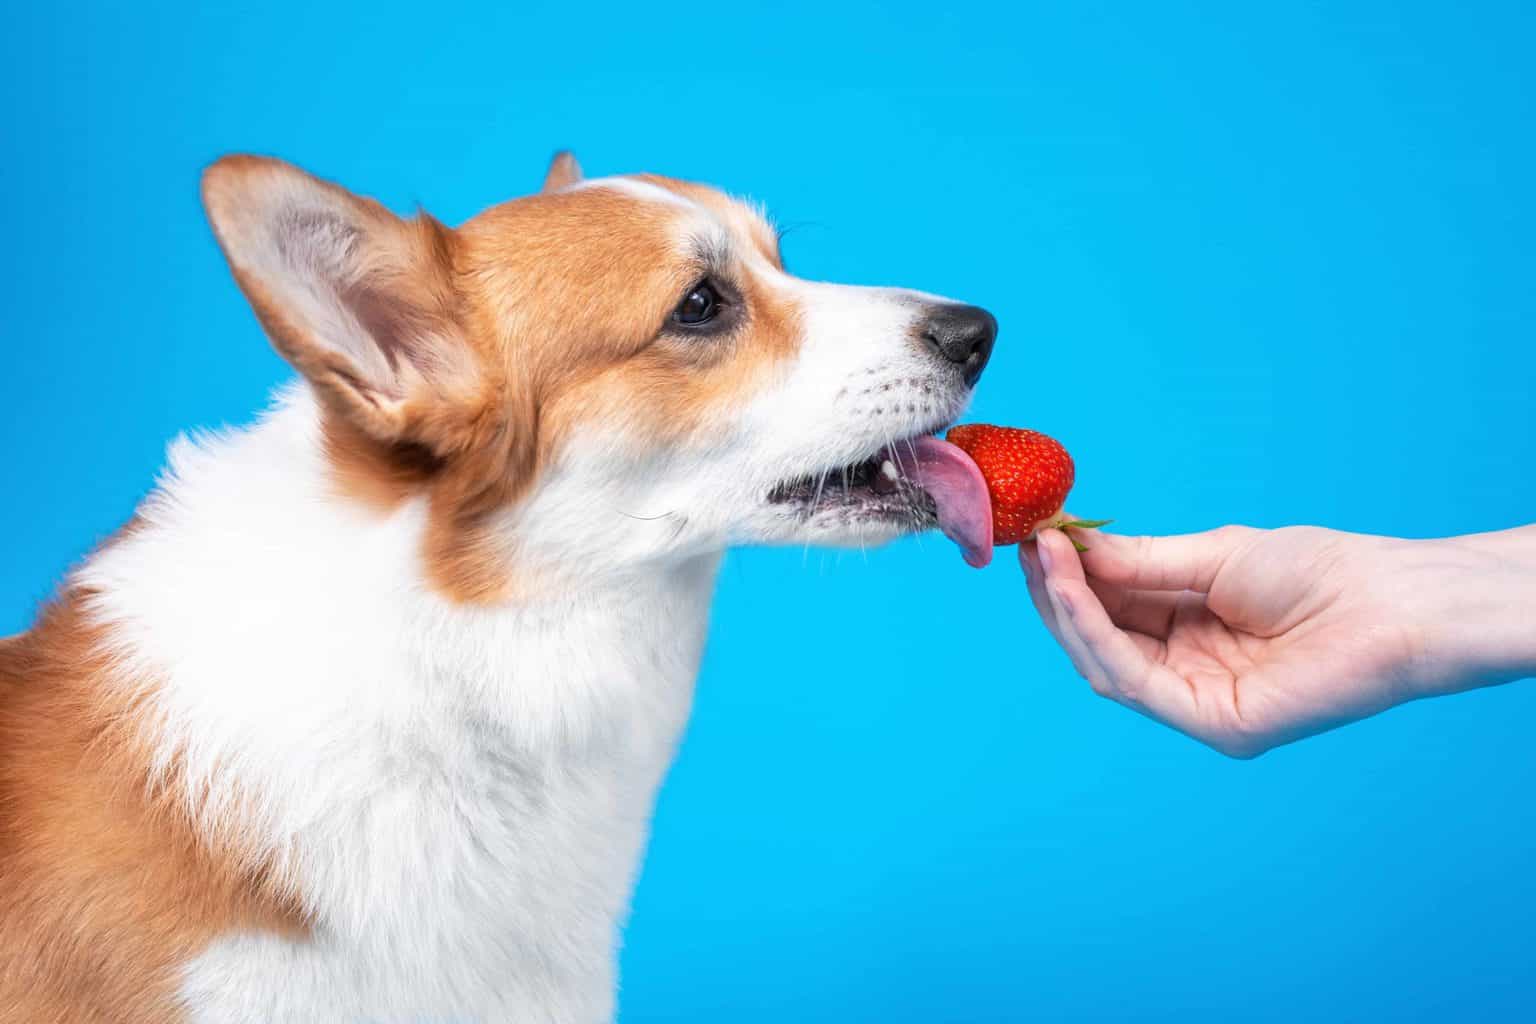 Curious corgi licks strawberry. Strawberries can be snacks or treats for dogs. Remove stems, leaves to eliminate choking hazard and avoid unripe berries that upset tummies.